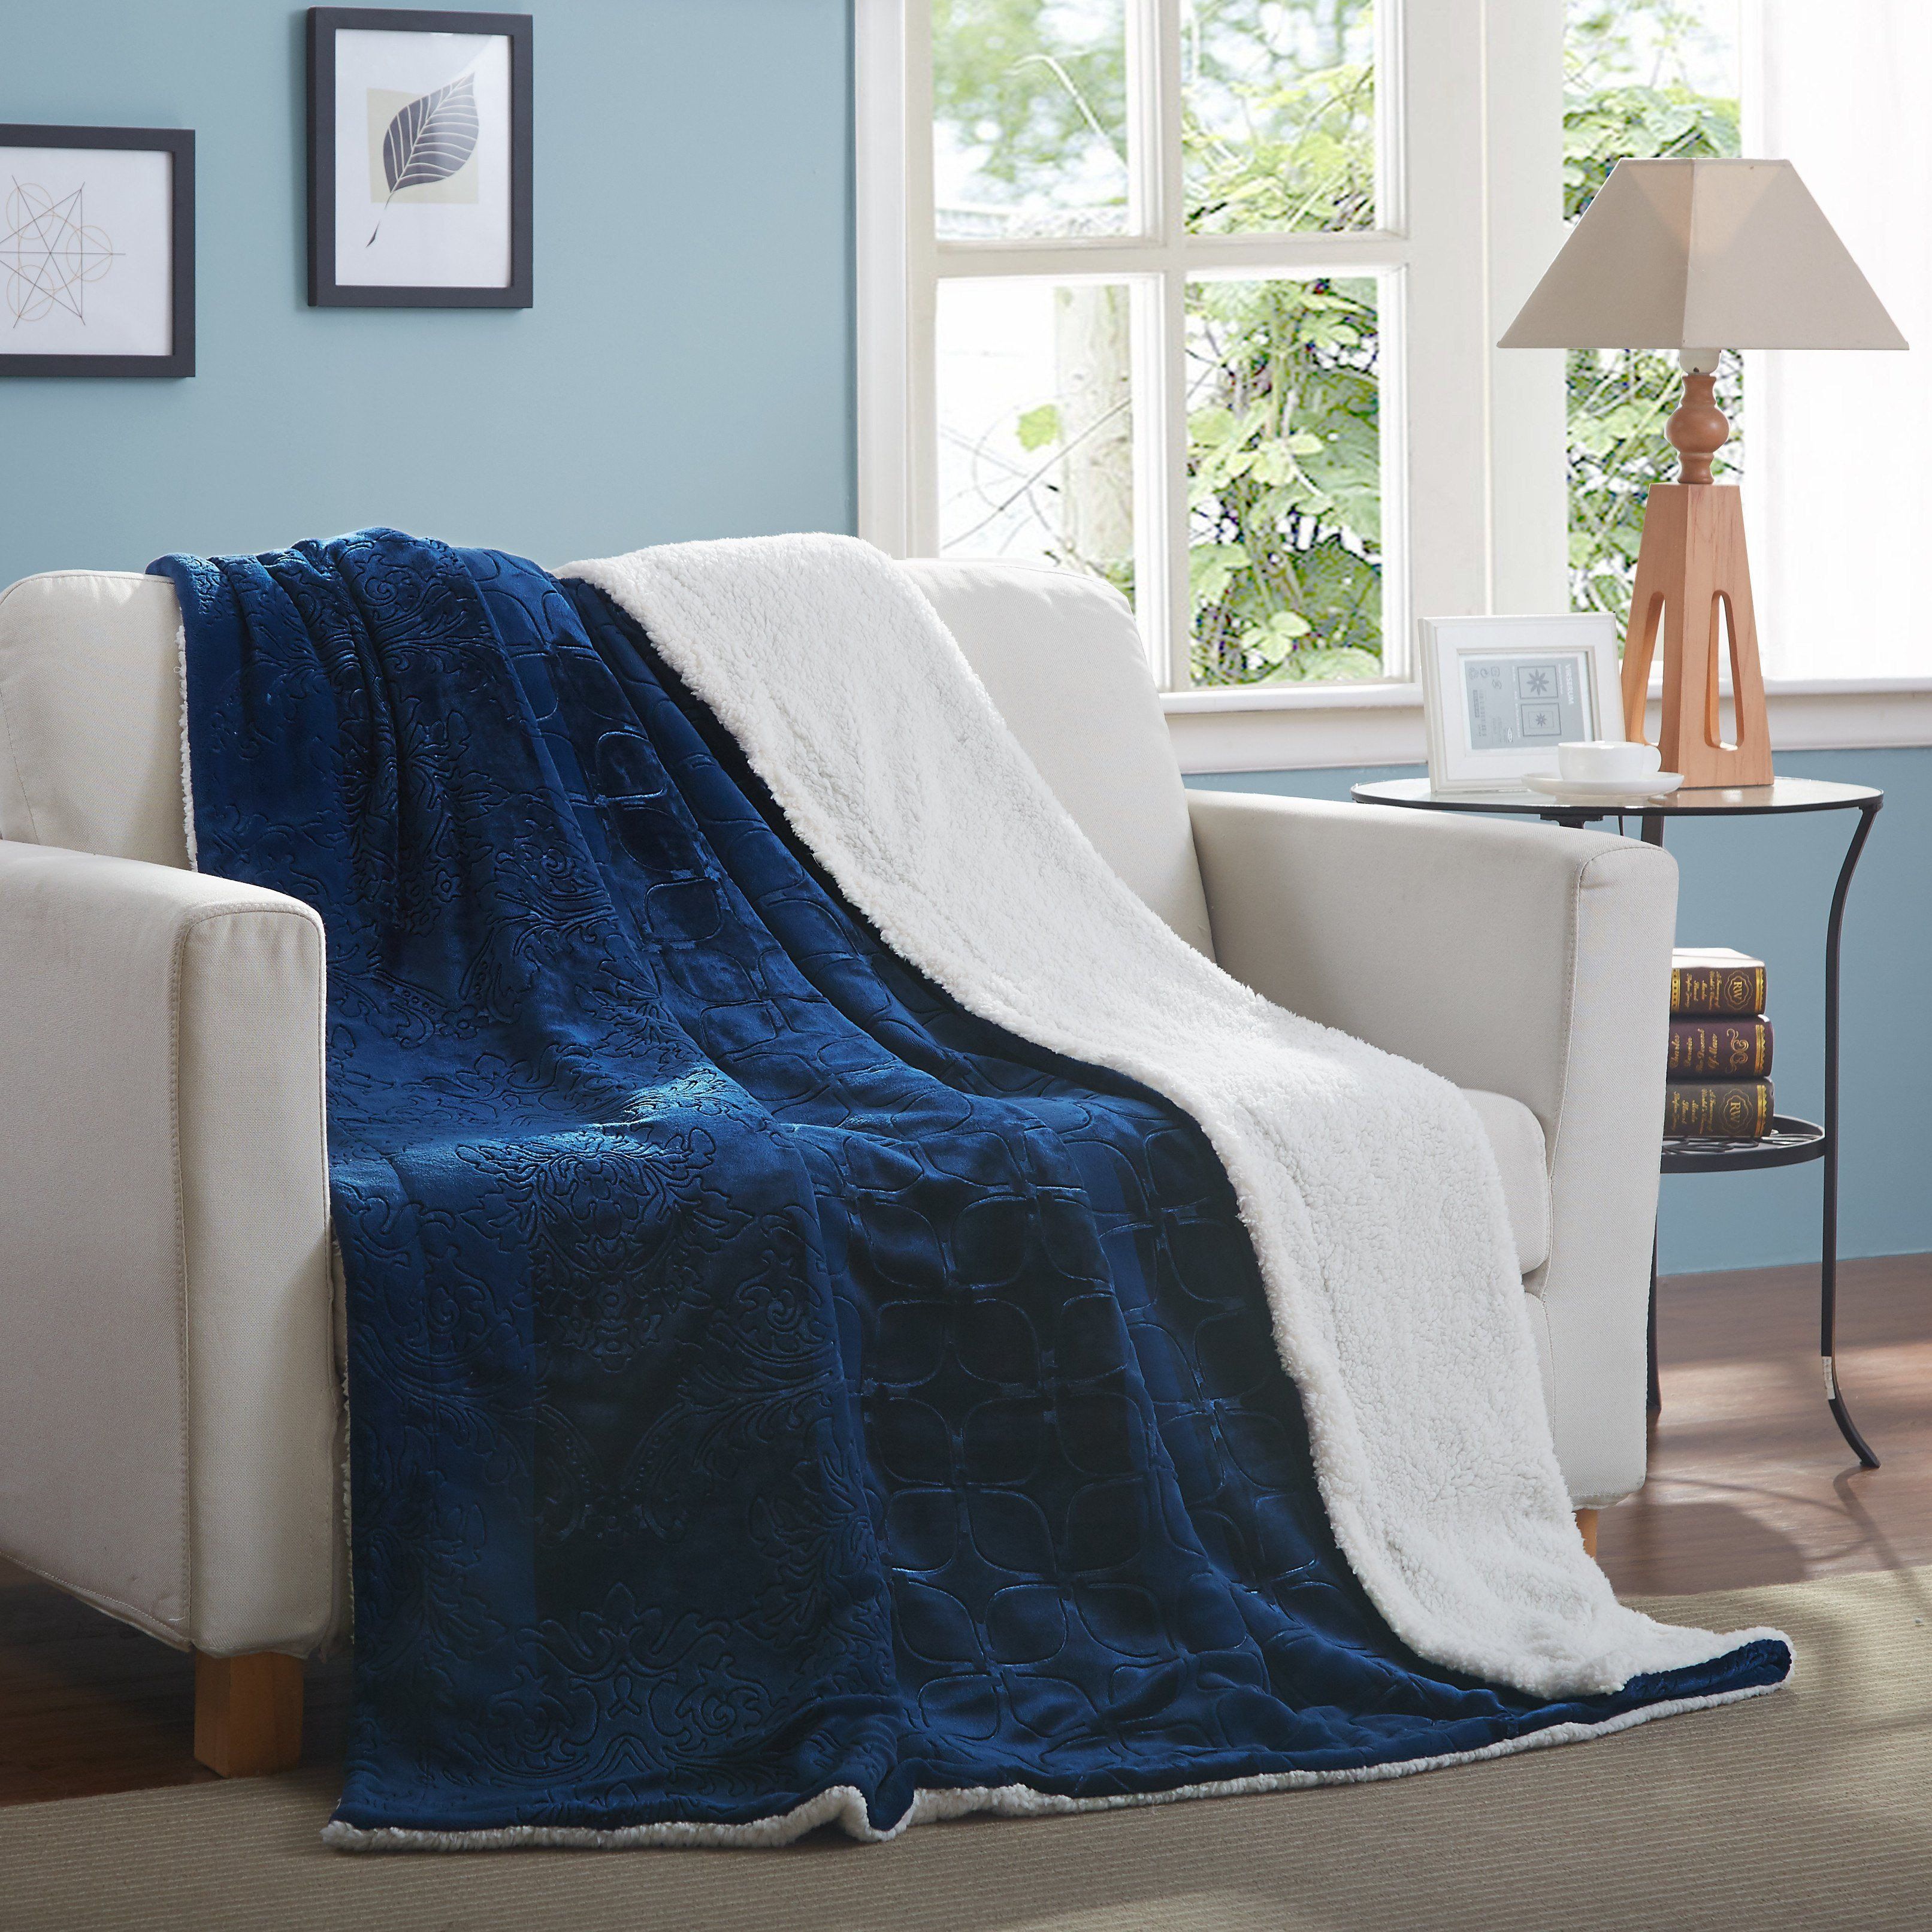 Tache Solid Embossed Cozy Night Blue Sherpa Throw Blanket (62093) - Tache Home Fashion